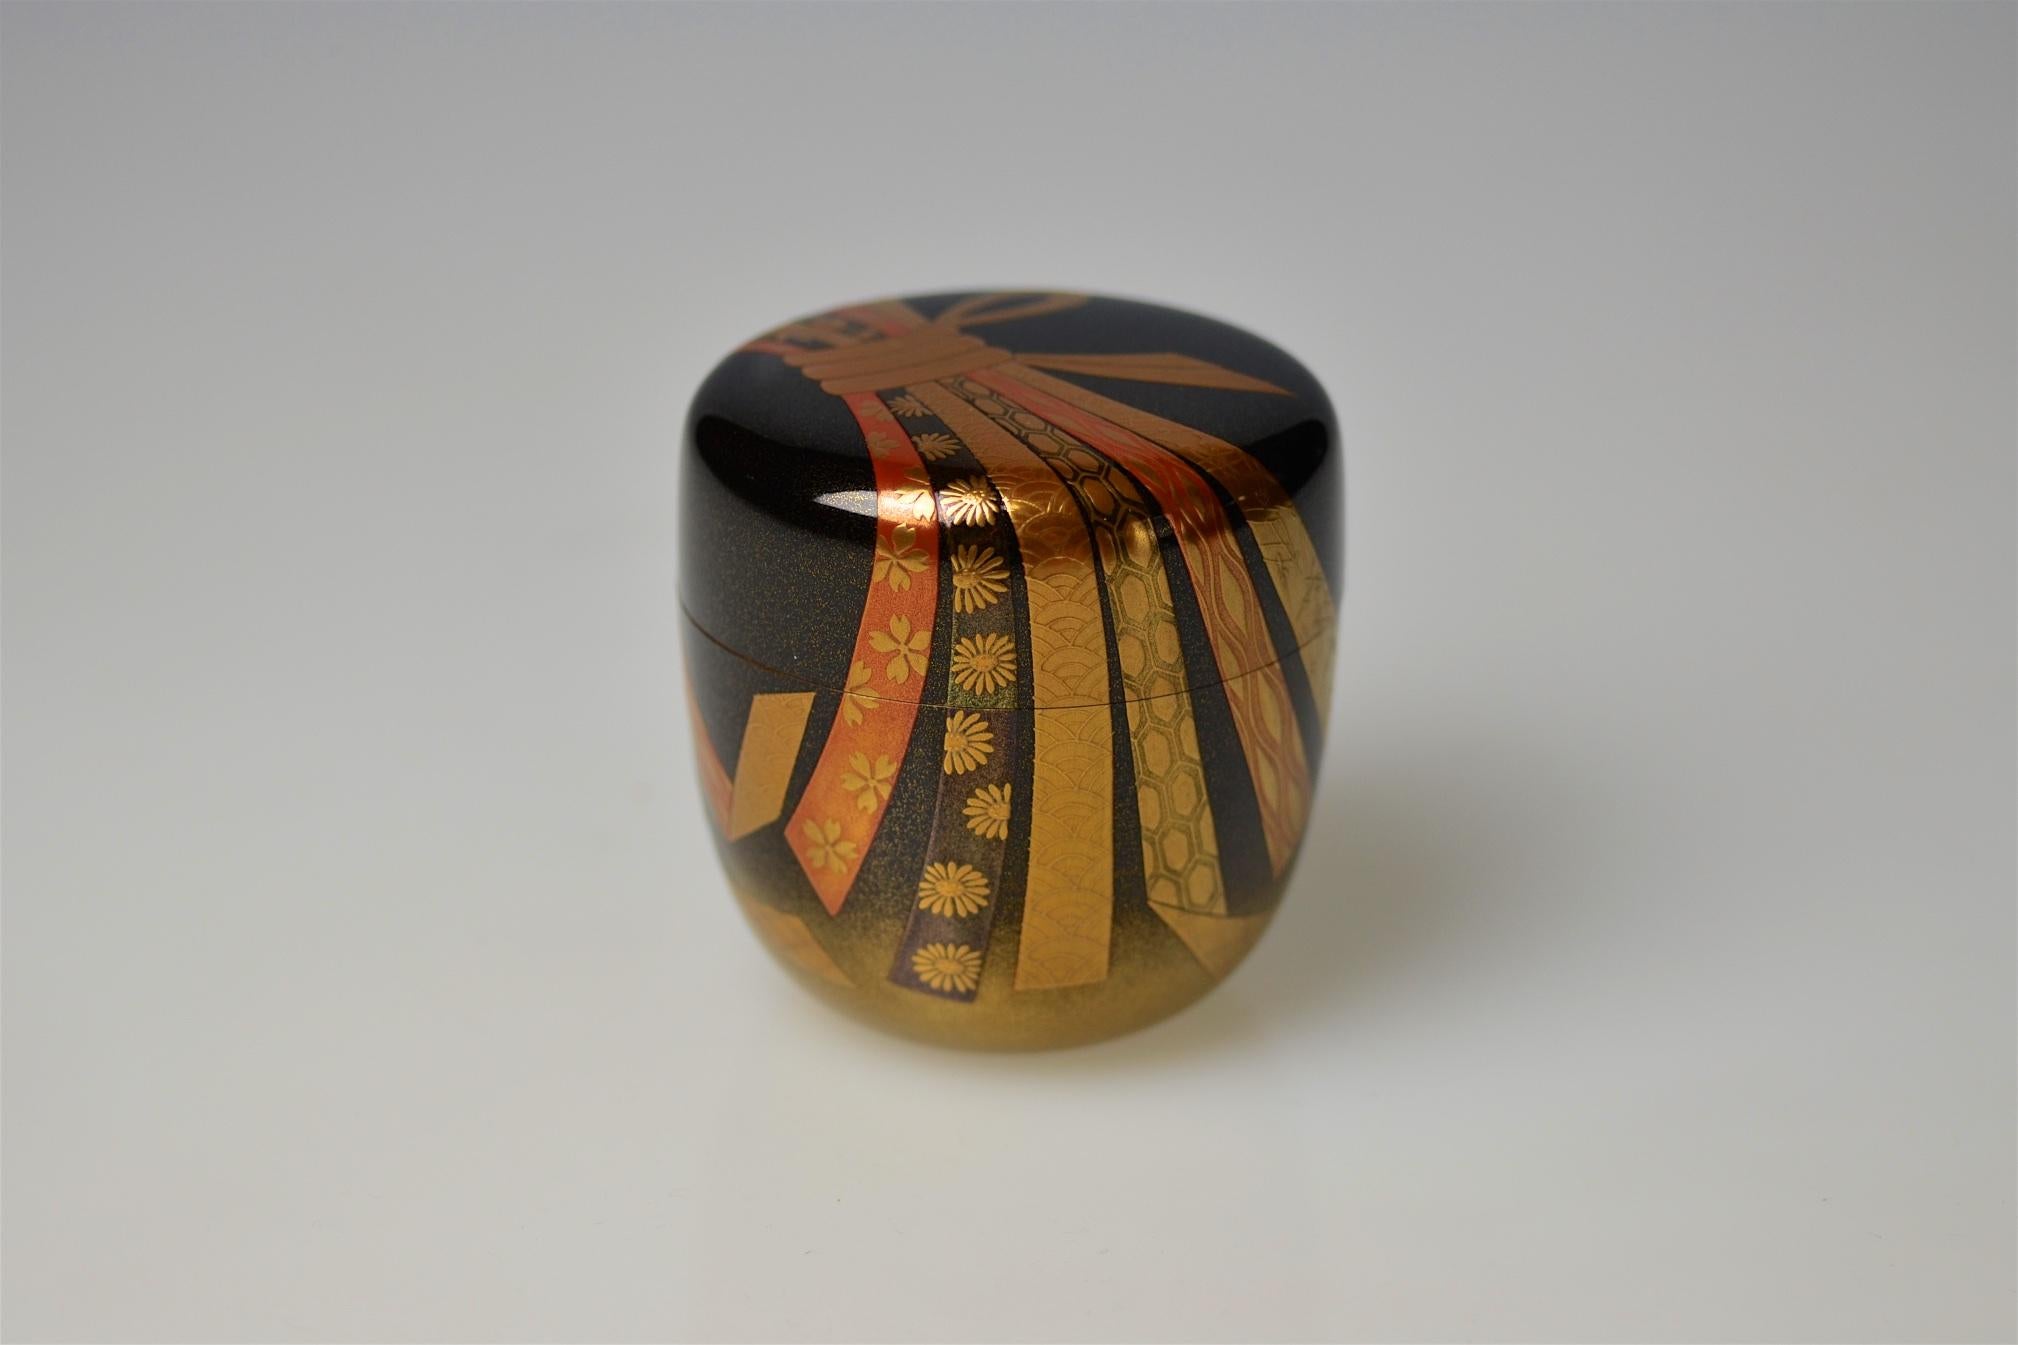 Showa Gold Lacquer Tea Caddy (Natsume) with festive knot by Ichigo Itcho (1898-1991) For Sale